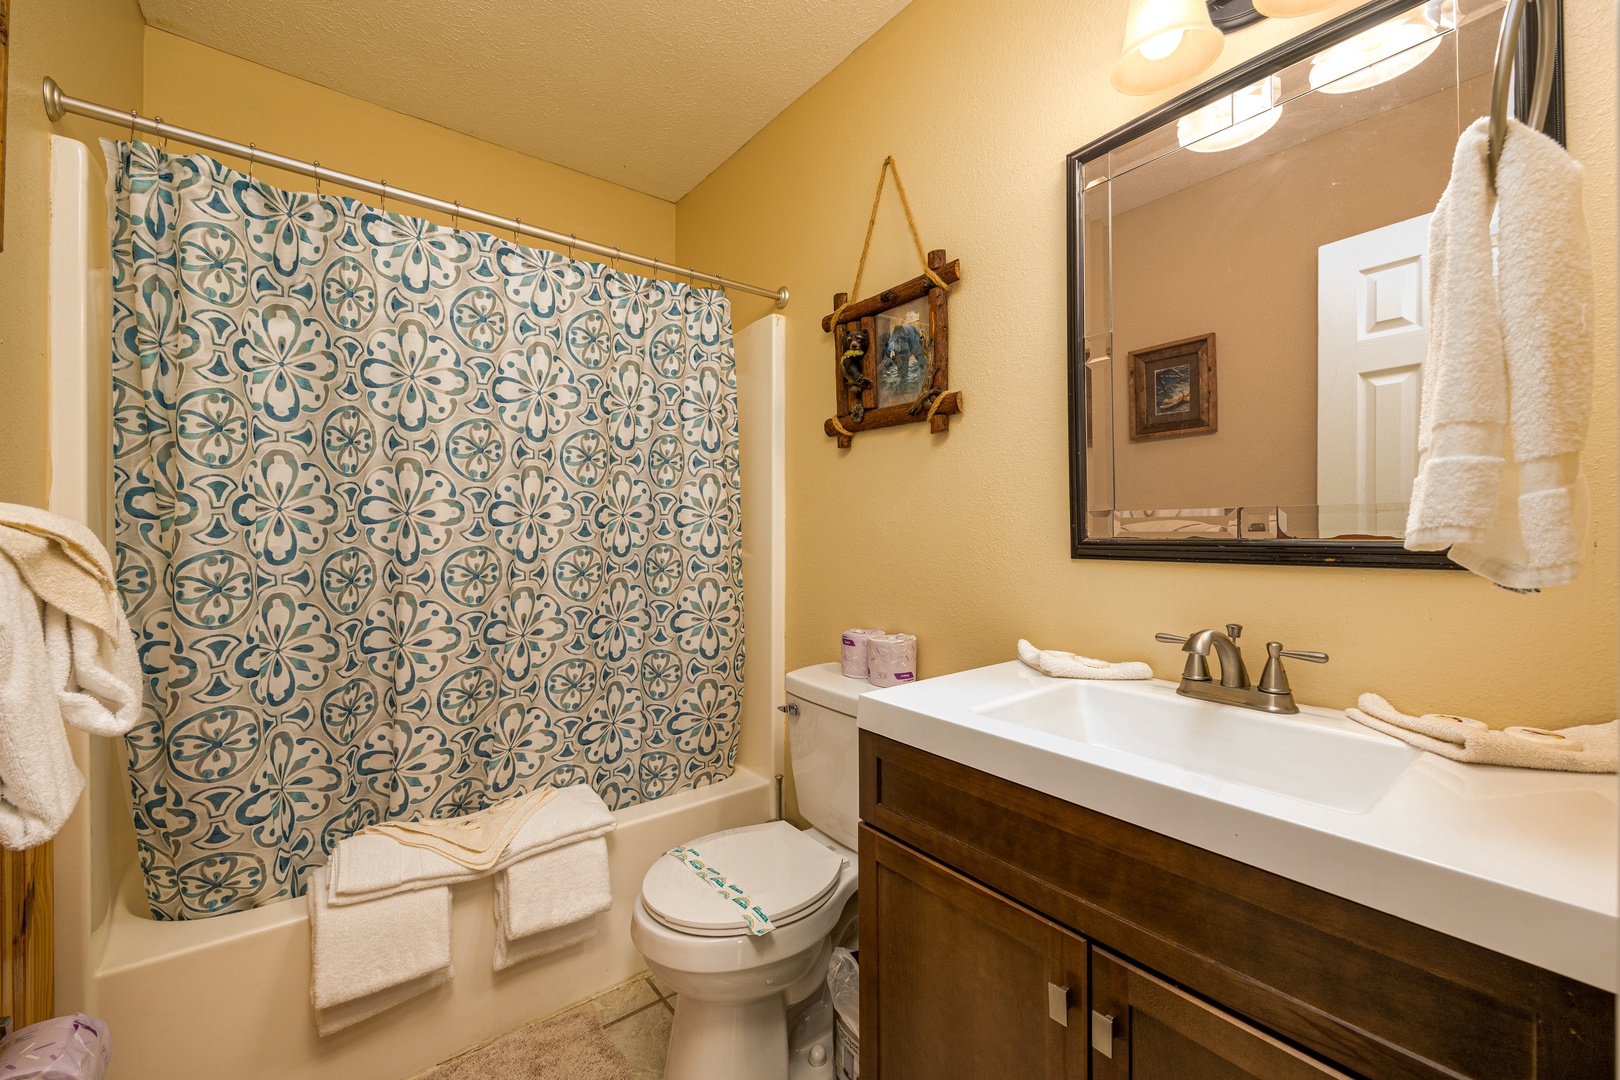 Bathroom at Liam's Lookout, a 2 bedroom cabin rental located in Pigeon Forge